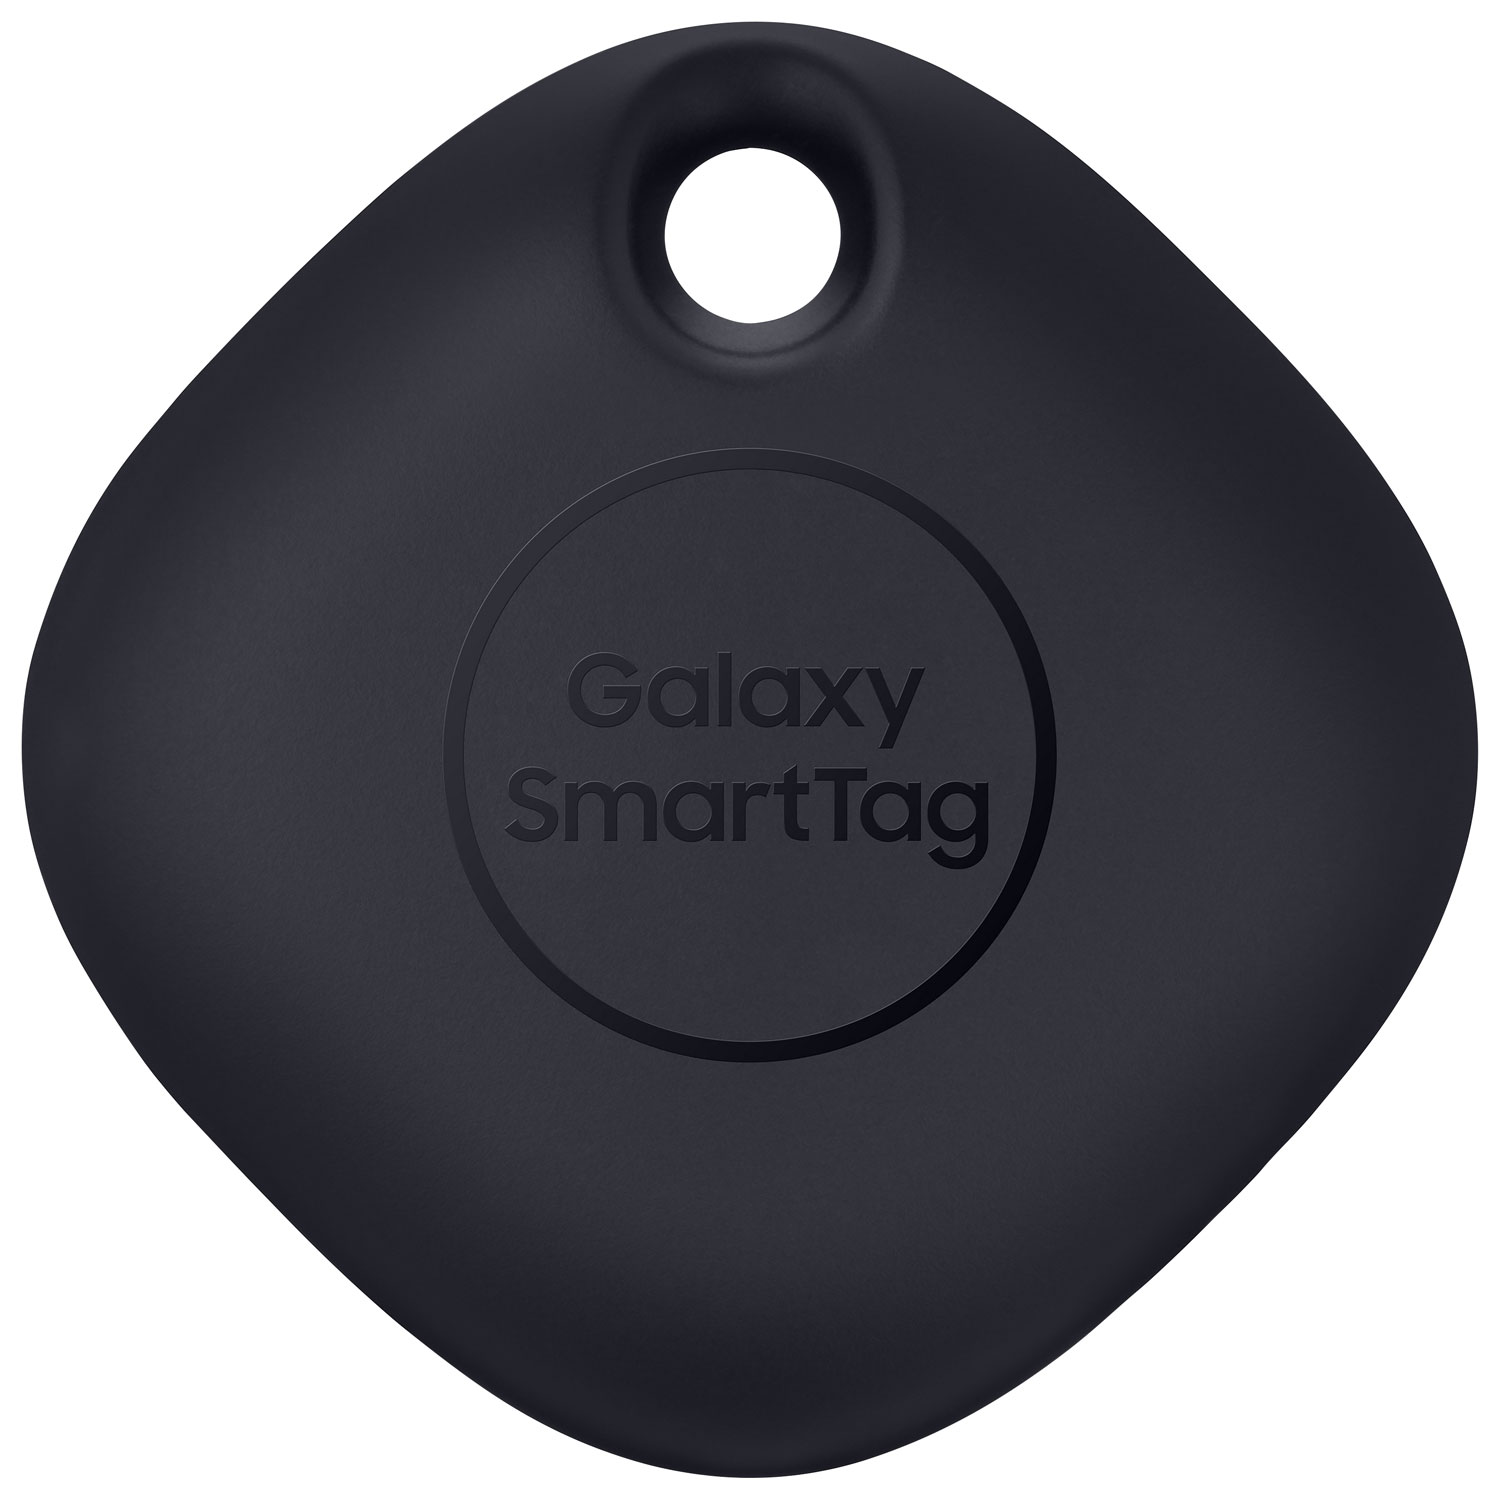 Exclusive] Samsung Galaxy Smart Tag design spotted on SmartThings app